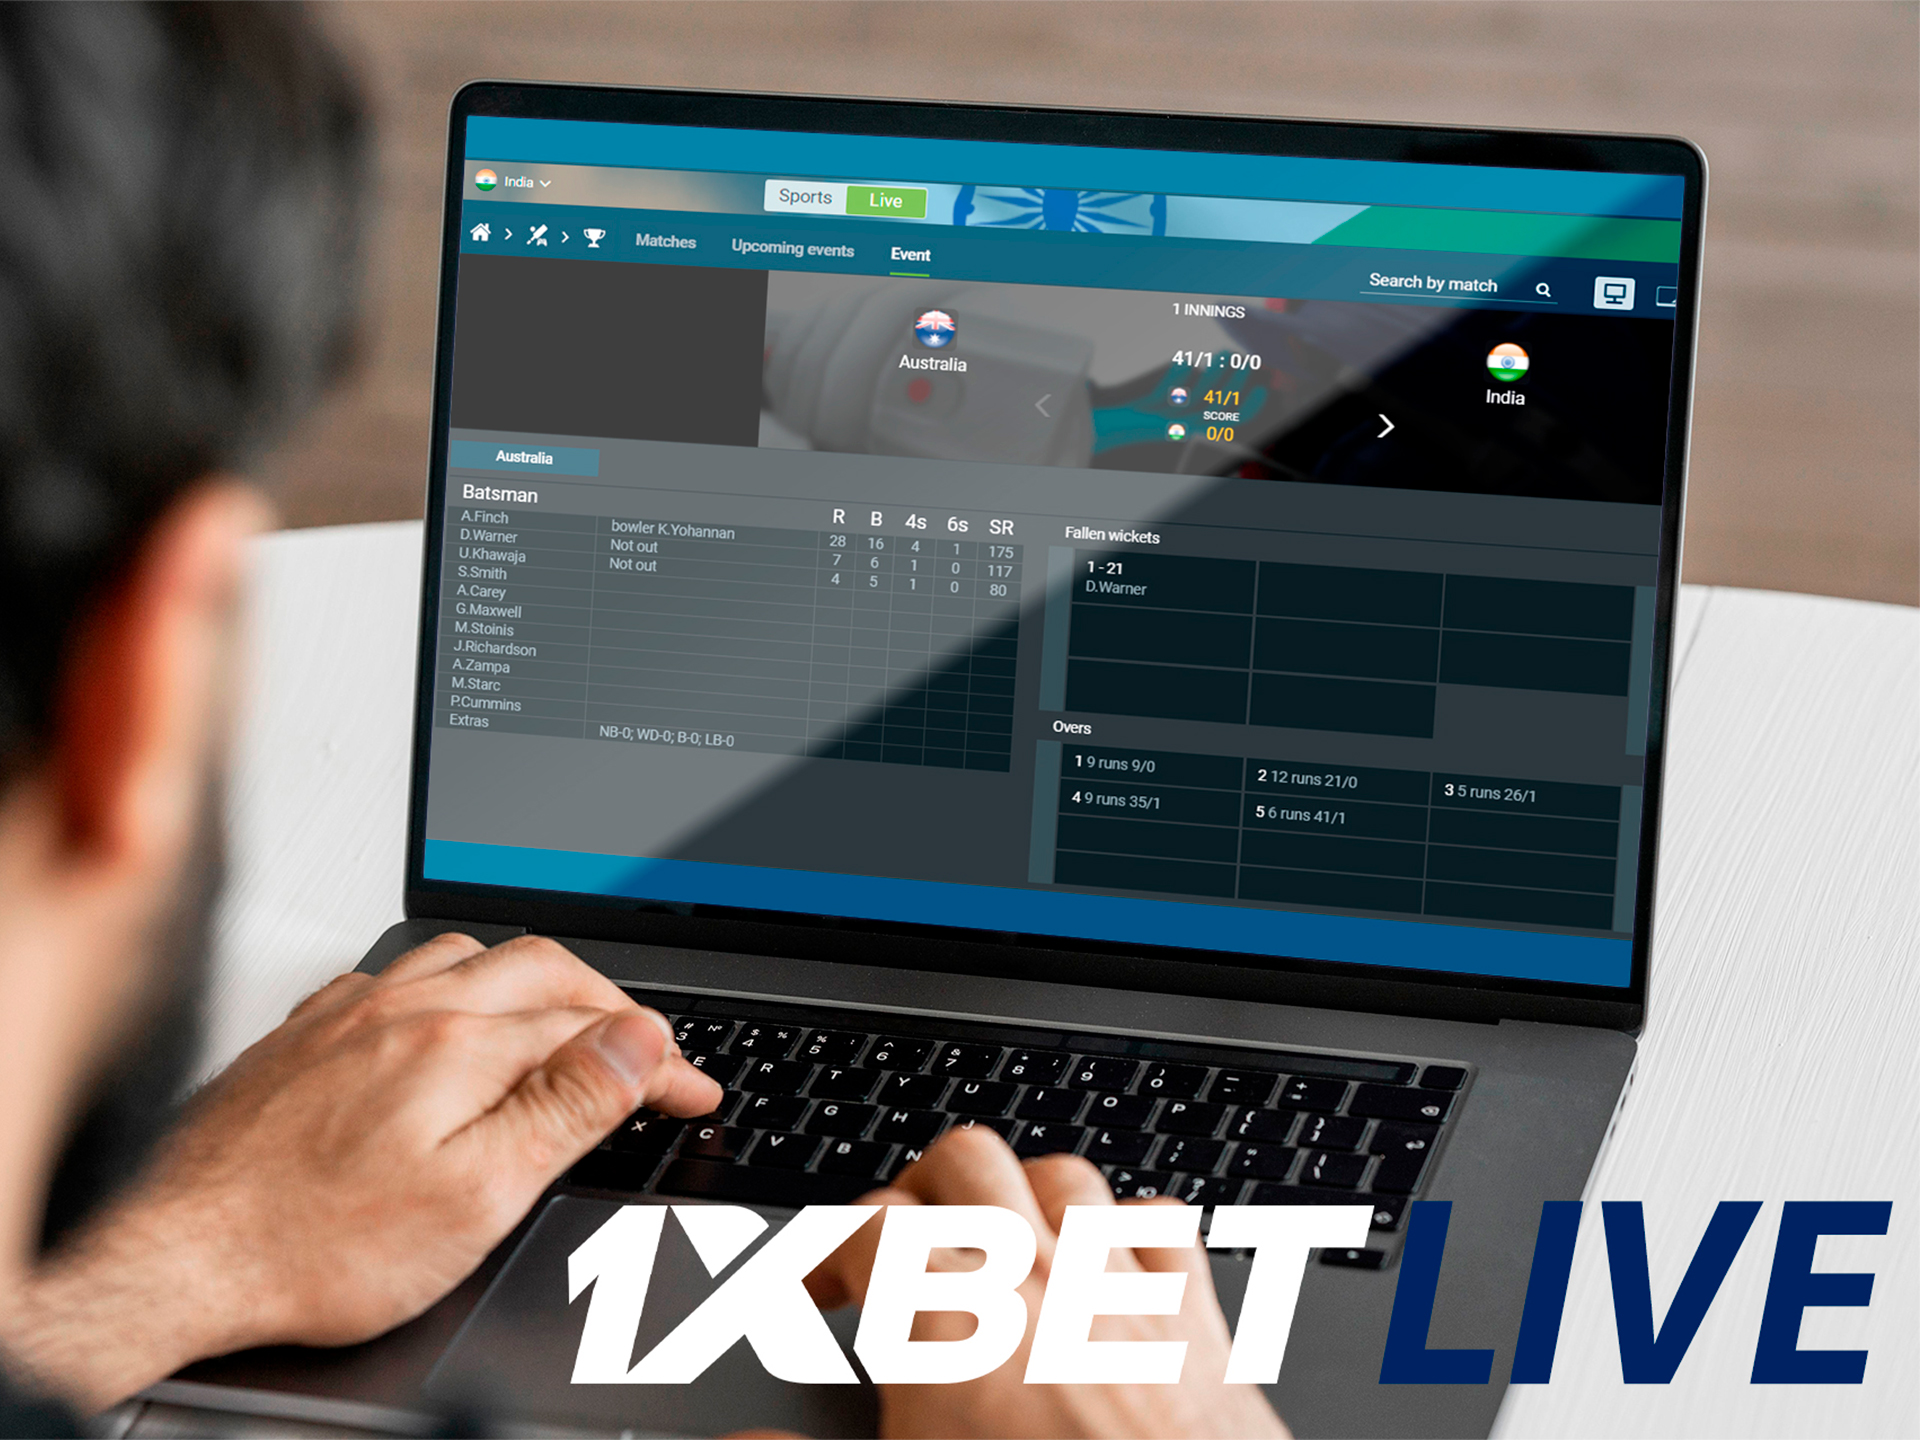 Bet on live events now!